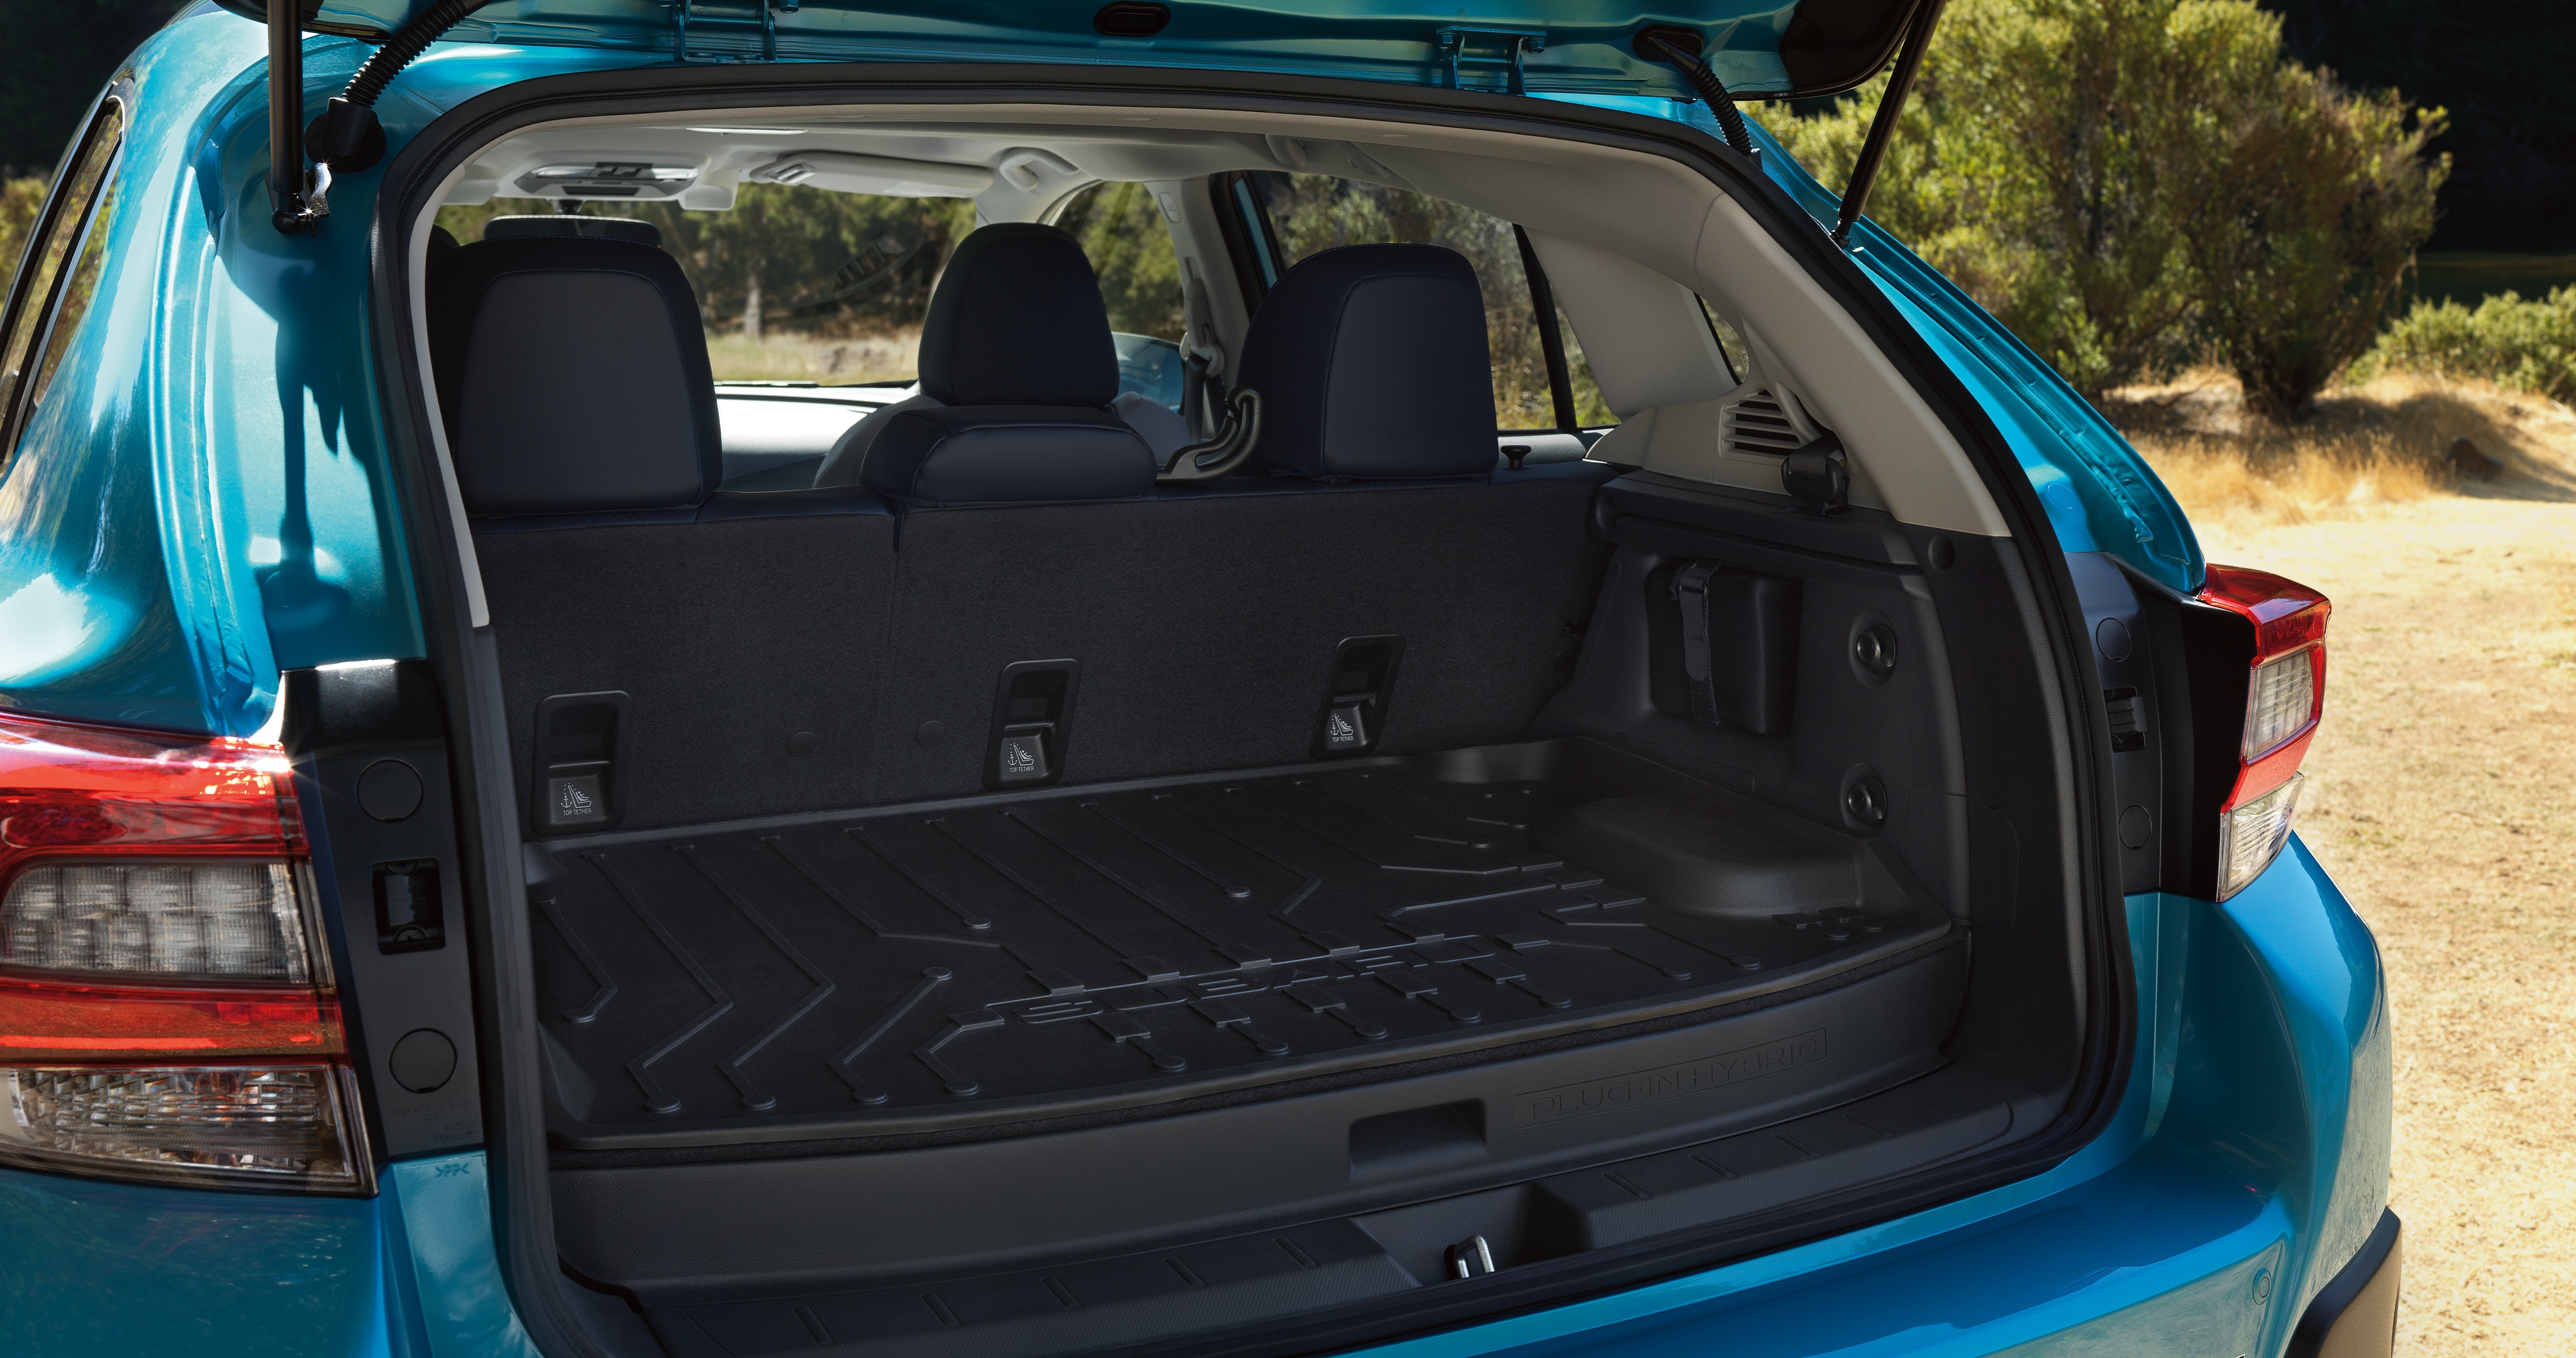  An exterior view of the rear cargo area of the 2023 Crosstrek Hybrid with the rear seatbacks folded down.